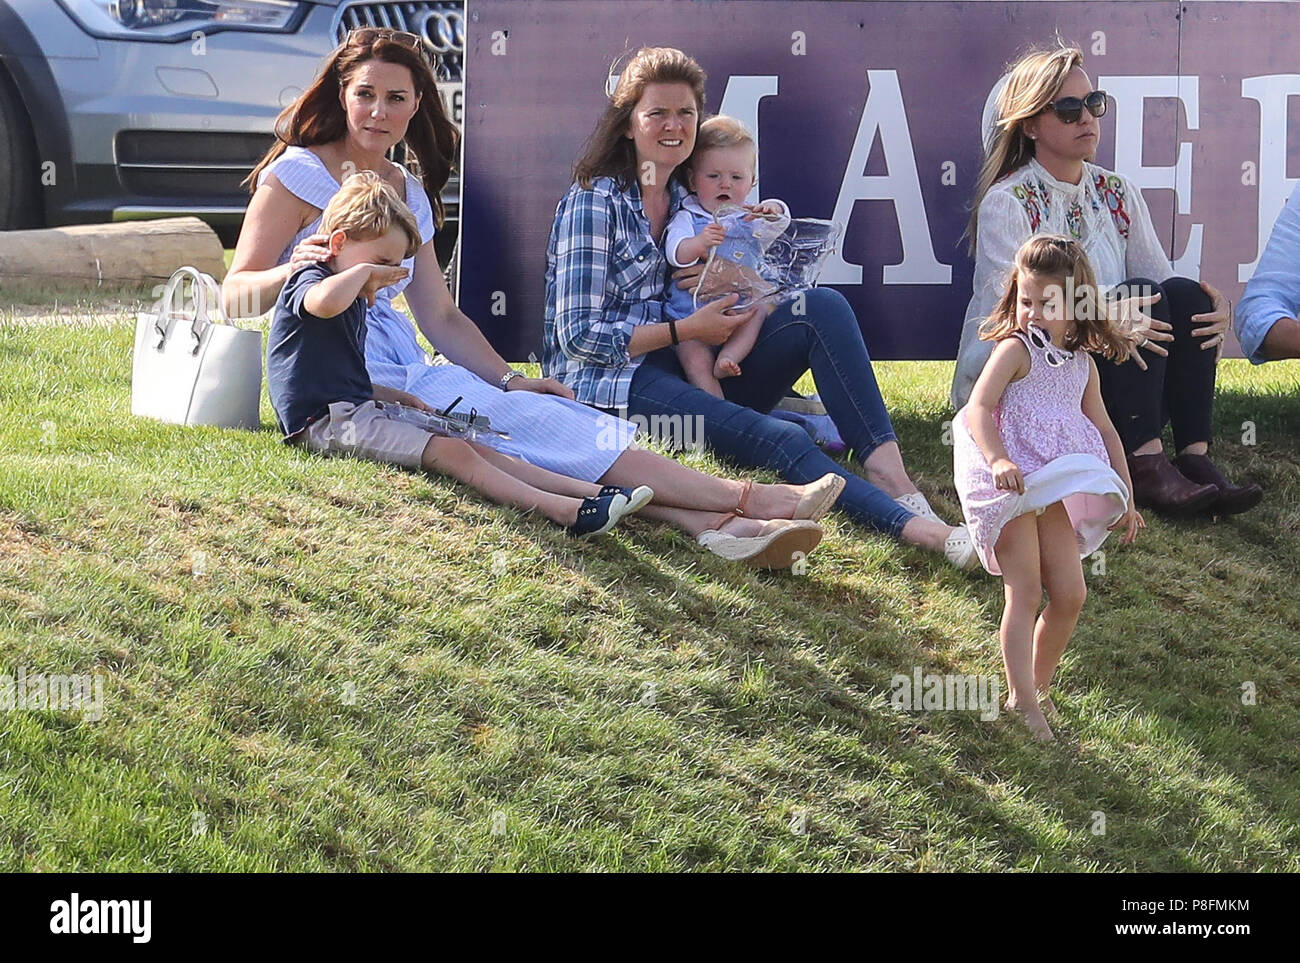 Catherine, Duchess of Cambridge, accompanied by Prince George and Princess Charlotte, attends the Maserati Polo match at Beaufort Polo Club in Gloucestershire  Featuring: Catherine Duchess of Cambridge, Catherine Middleton, Kate Middleton, Prince George, Princess Charlotte Where: Tetbury, United Kingdom When: 10 Jun 2018 Credit: John Rainford/WENN Stock Photo